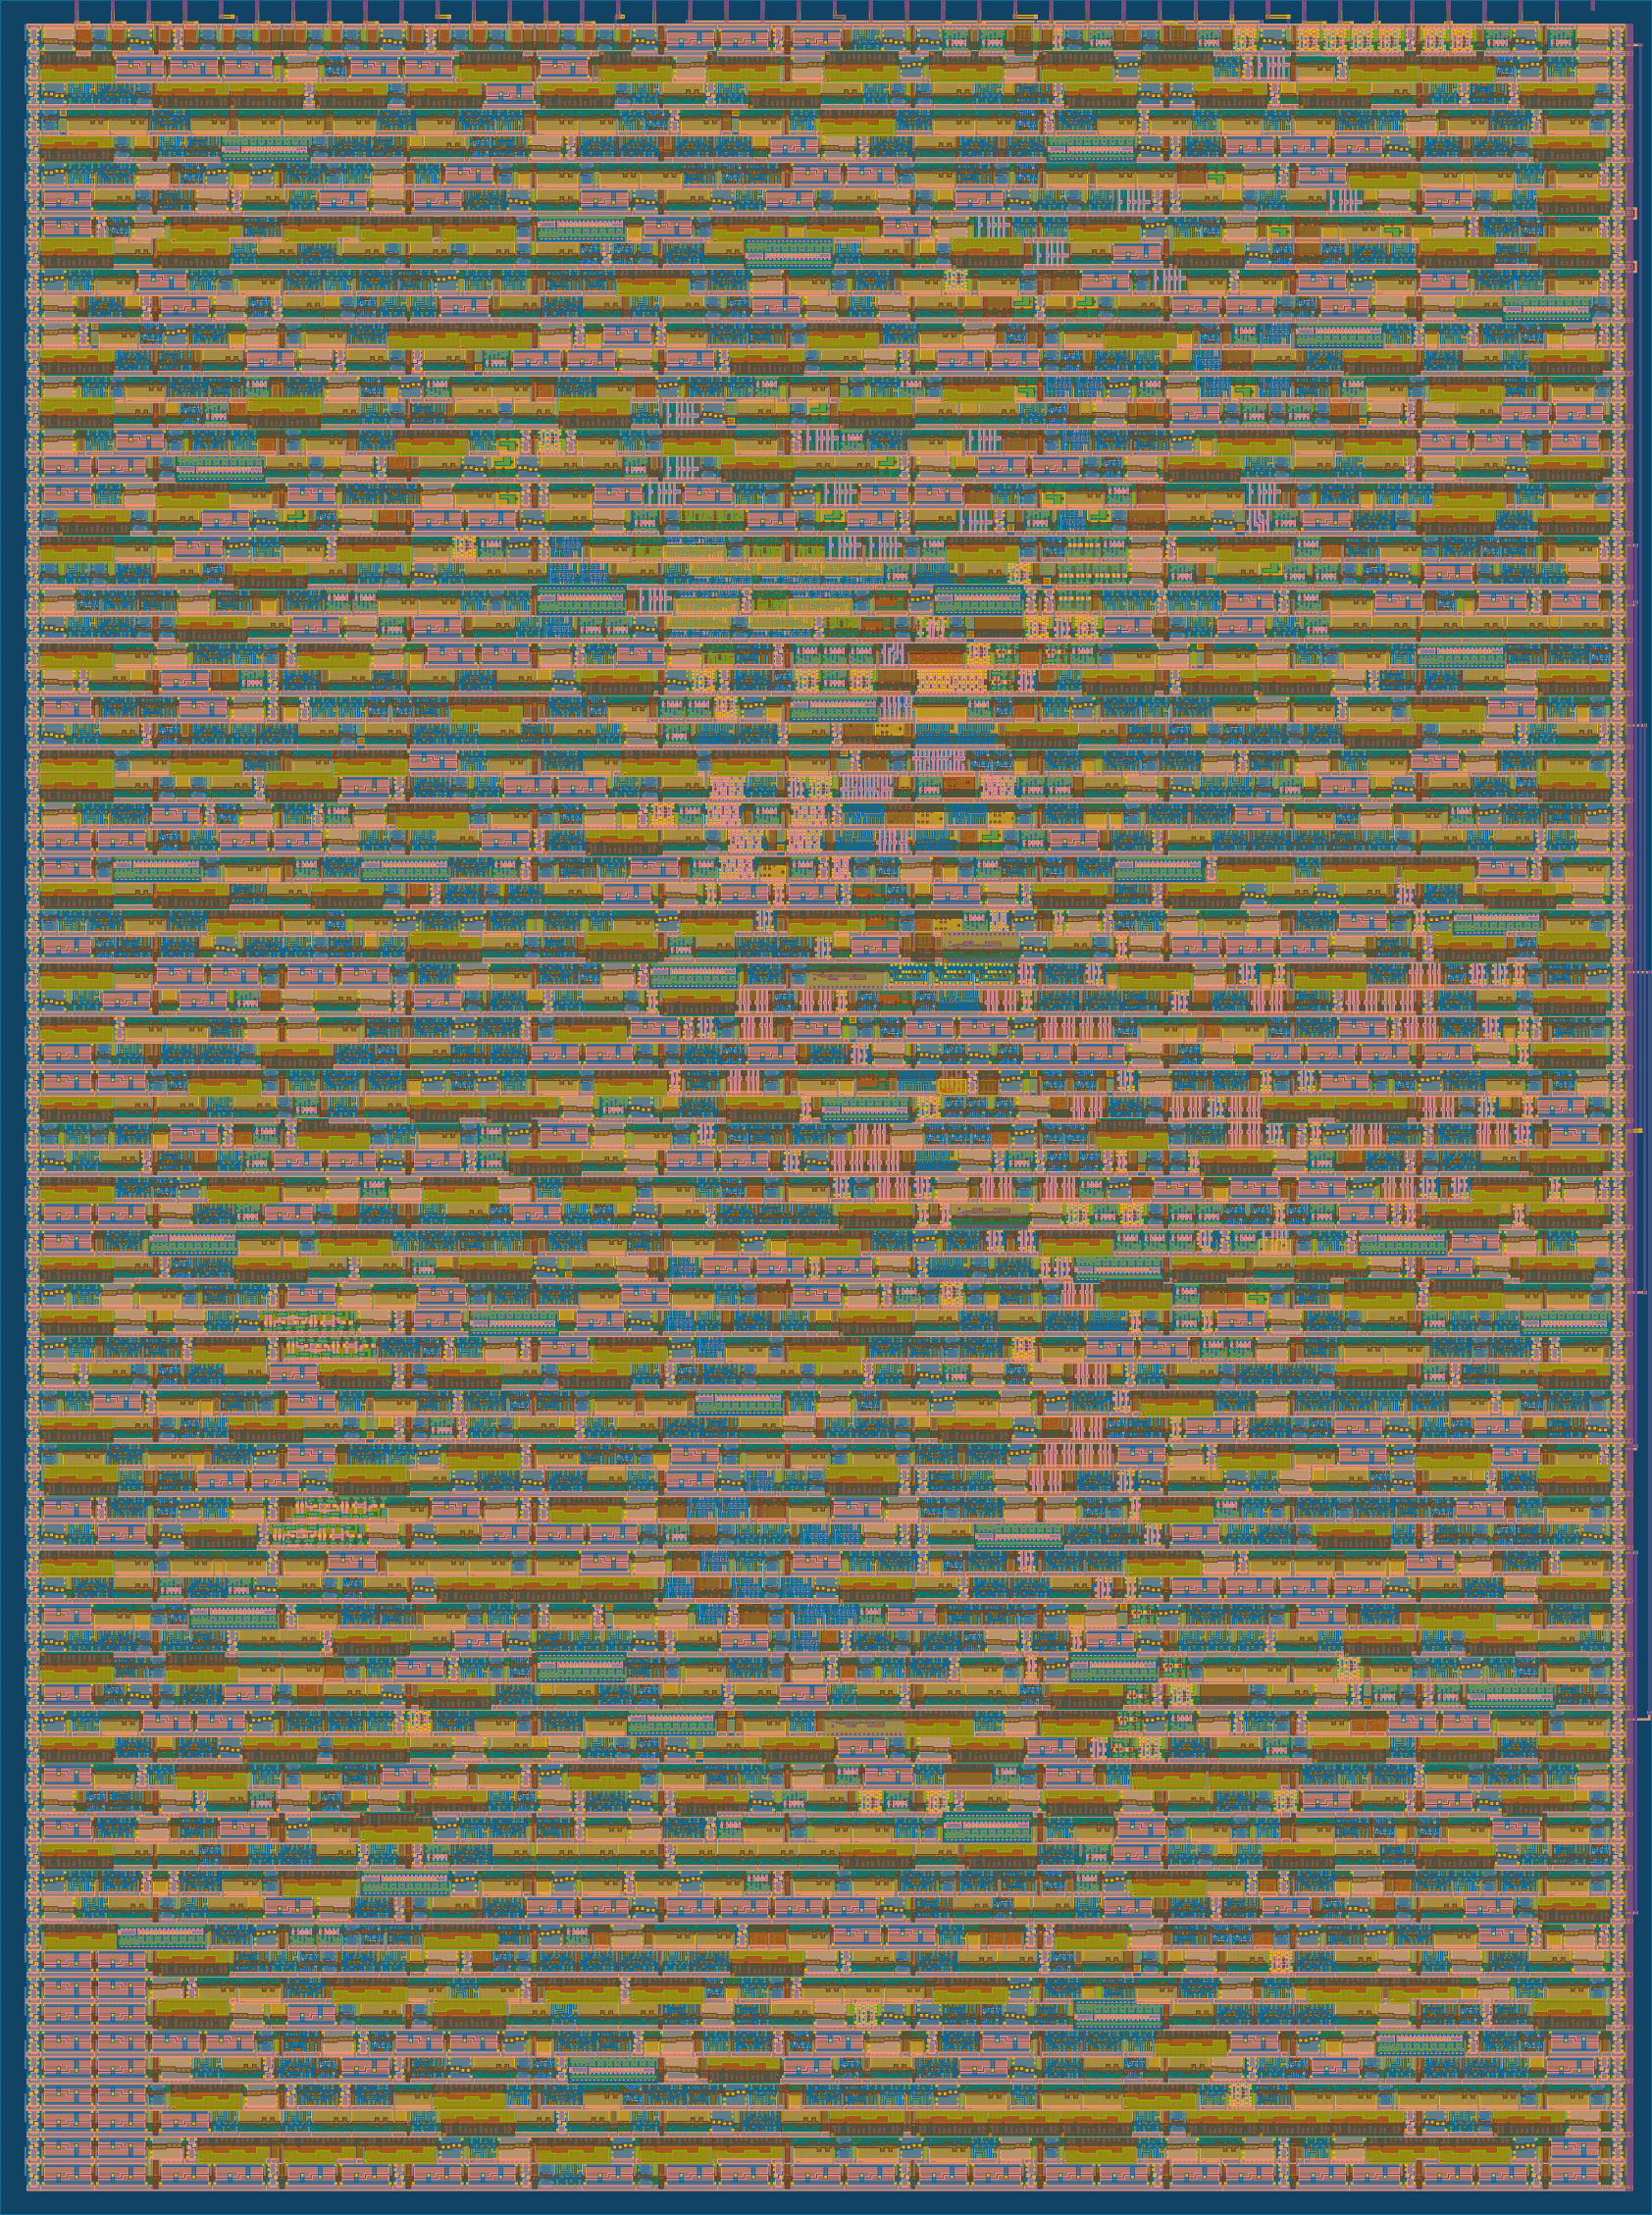 GDS render with 256 automaton cells